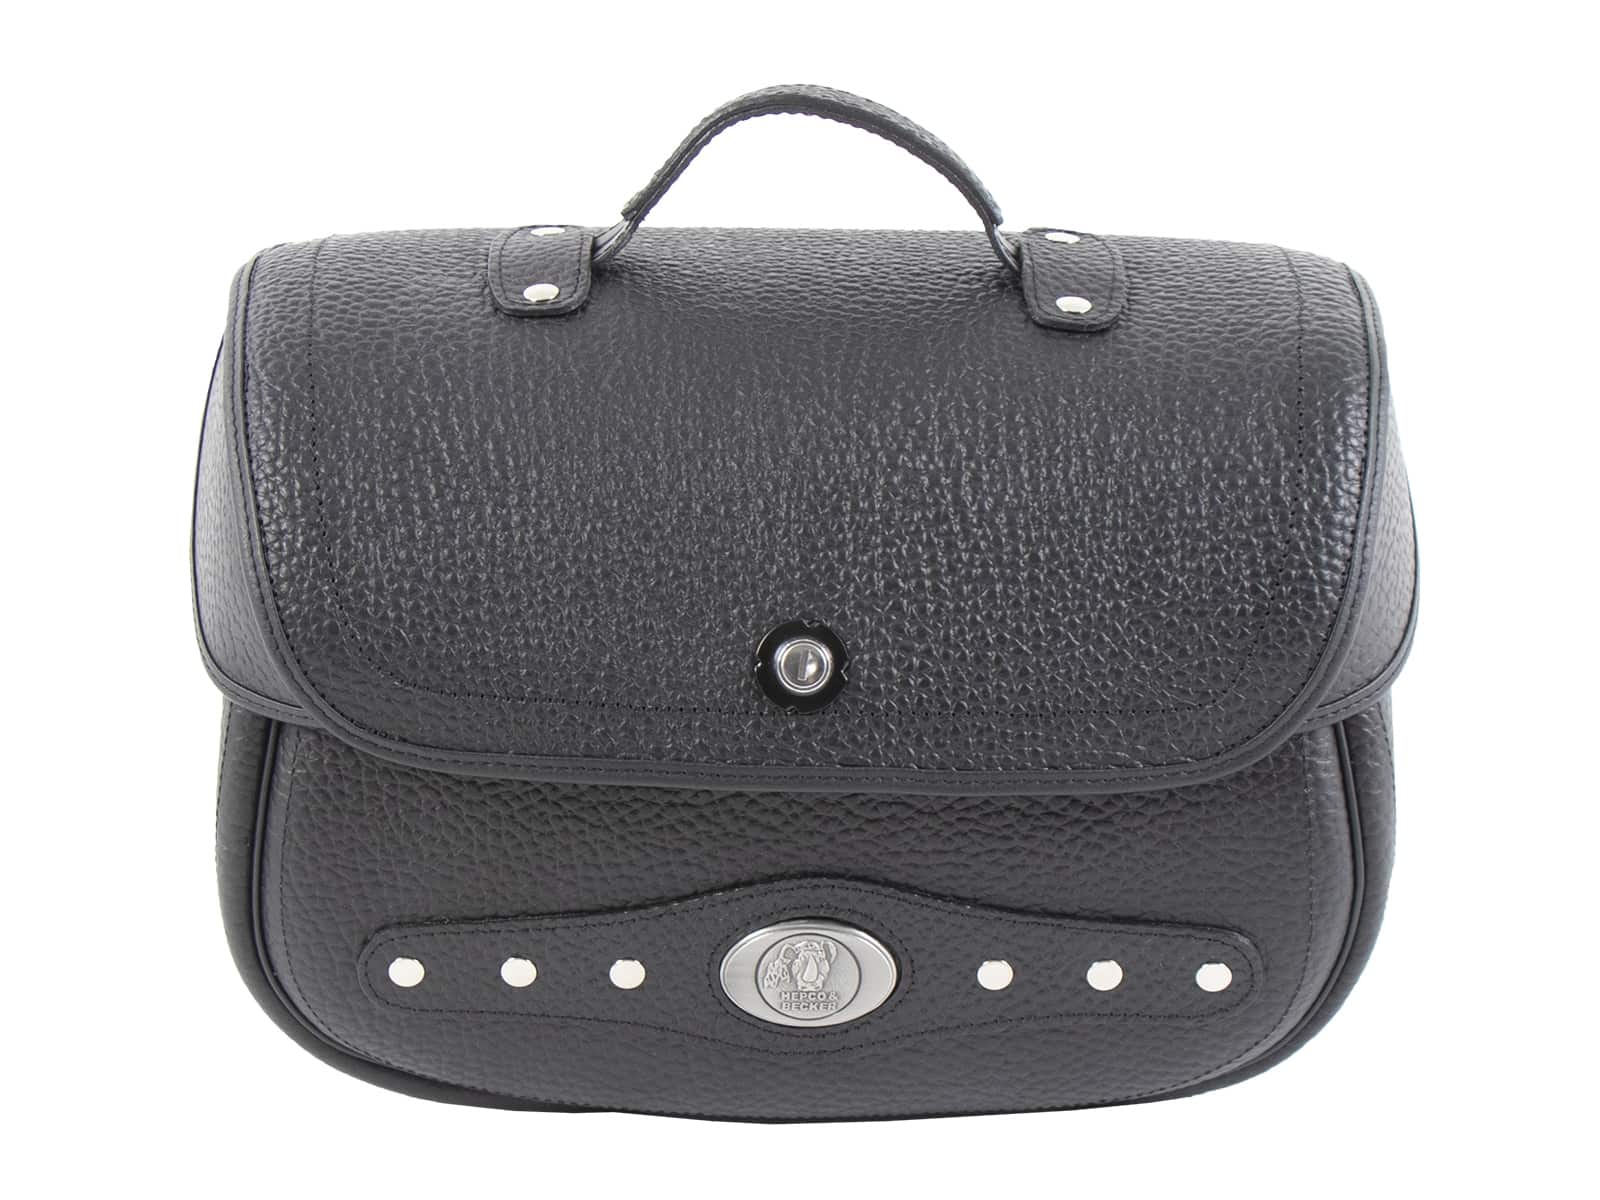 Nevada leather bag set for C-Bow